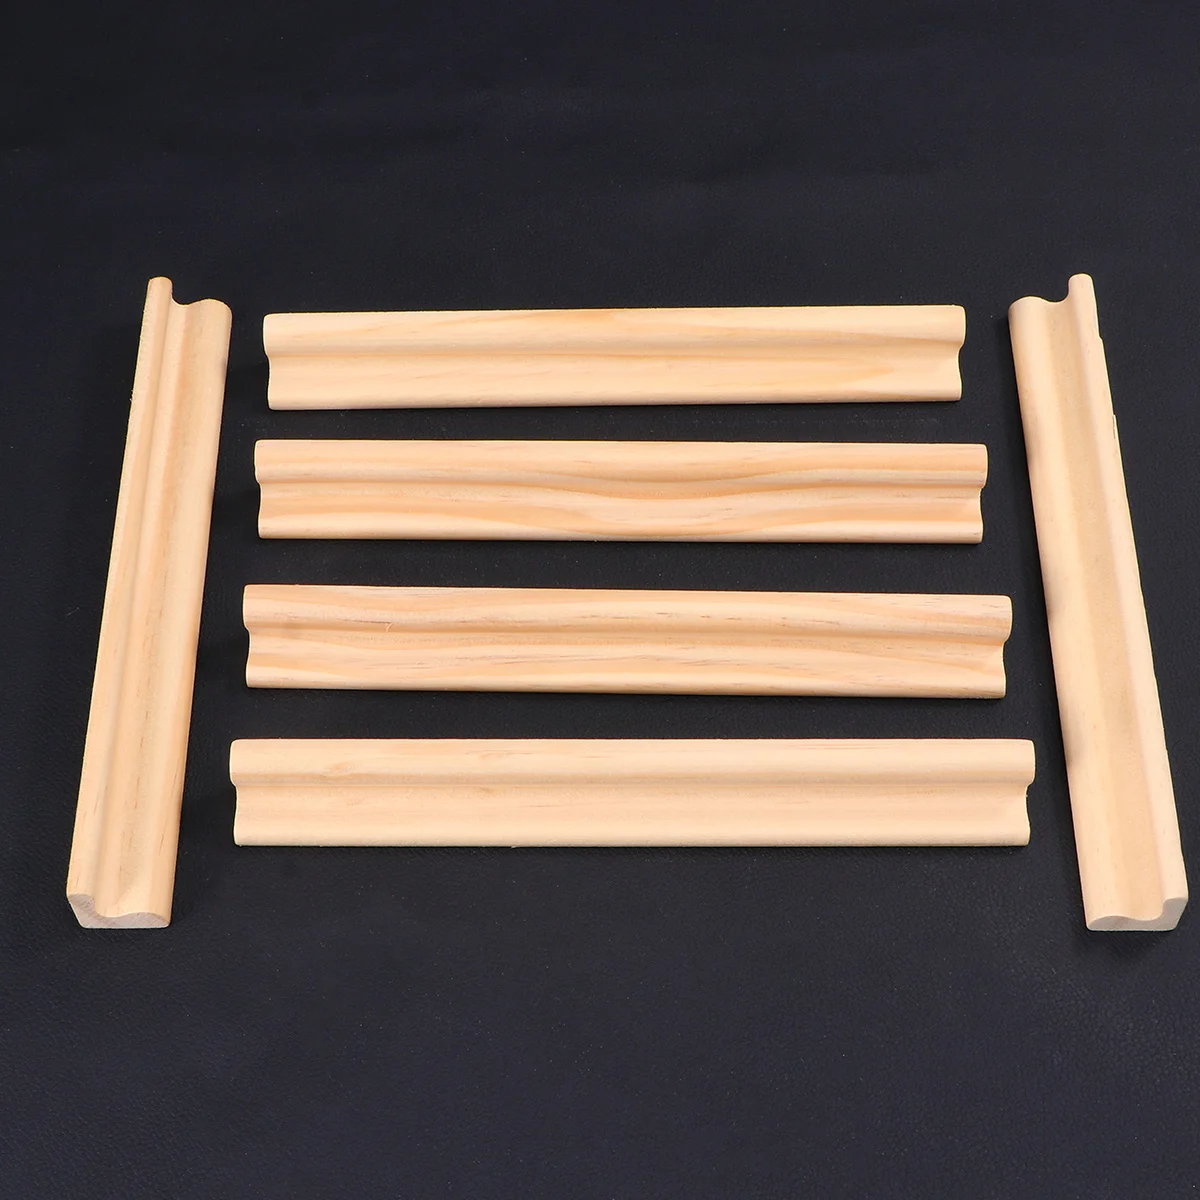 

10PCS Wooden Domino Racks Trays Domino Tiles Holder Organizer for Mexican Train Dominoes Games DIY Kids Playing 19cm